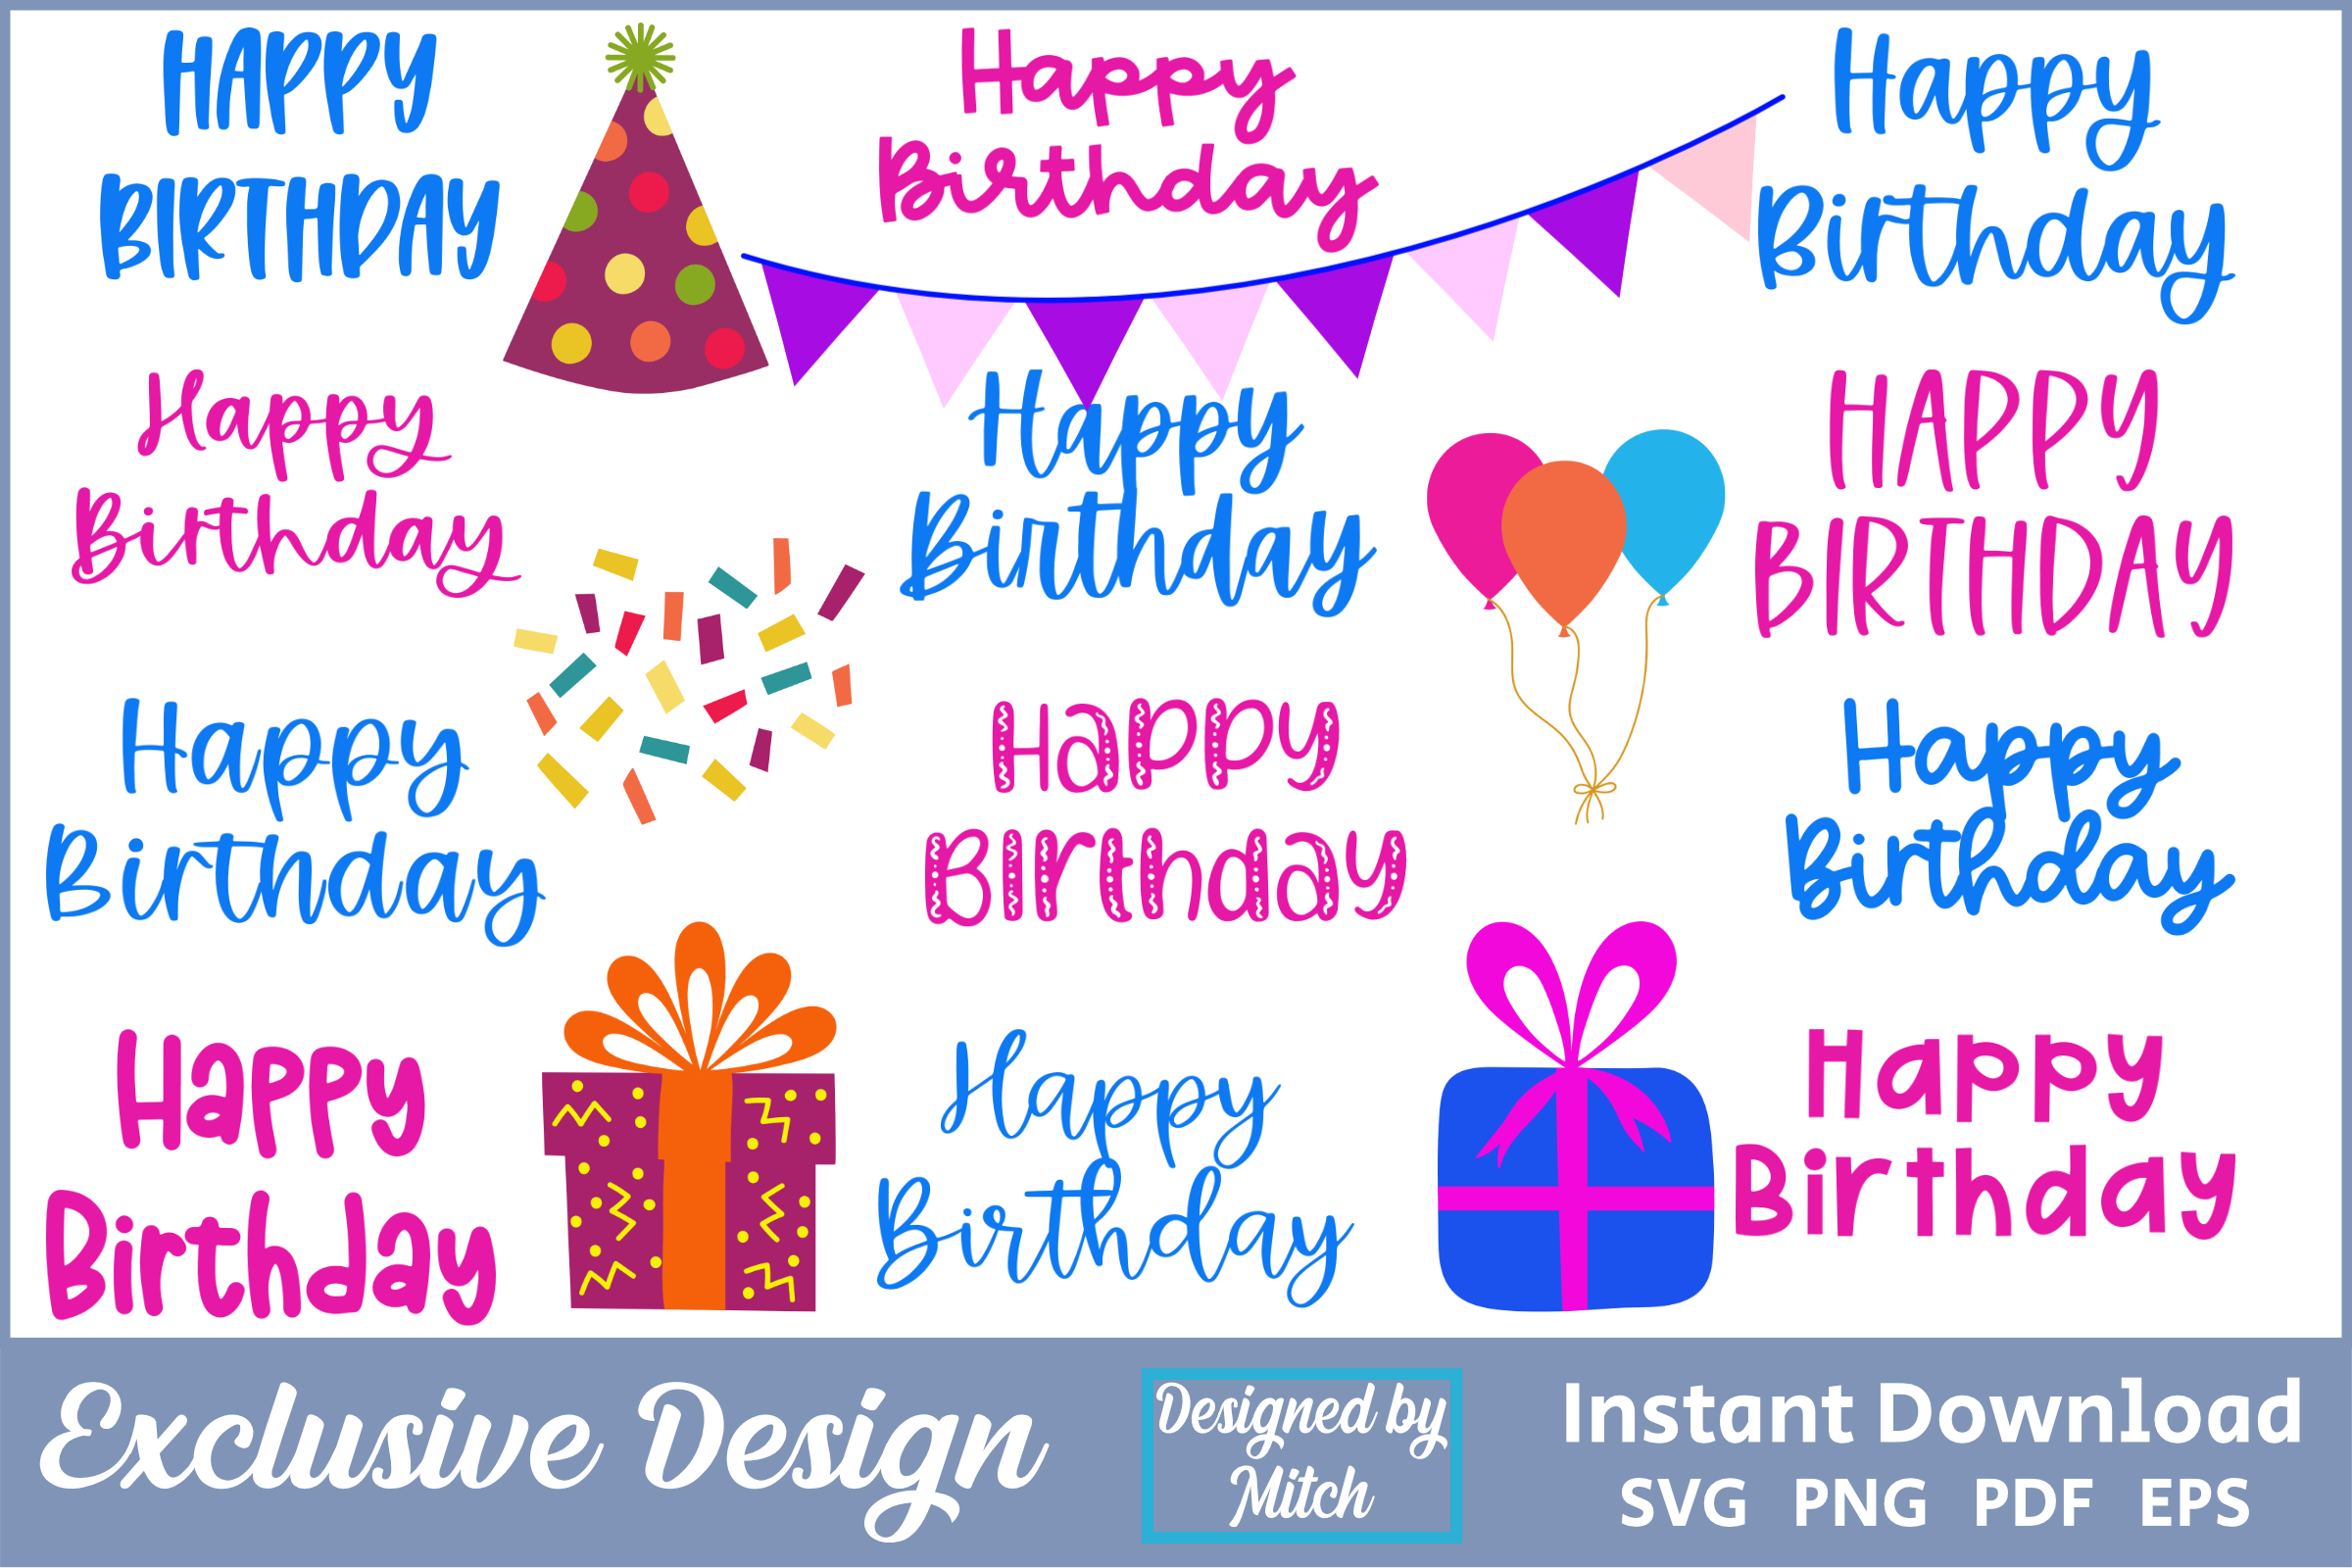 Happy Birthday Day SVG Graphic File Pack Graphic by Designed By Mitch ...